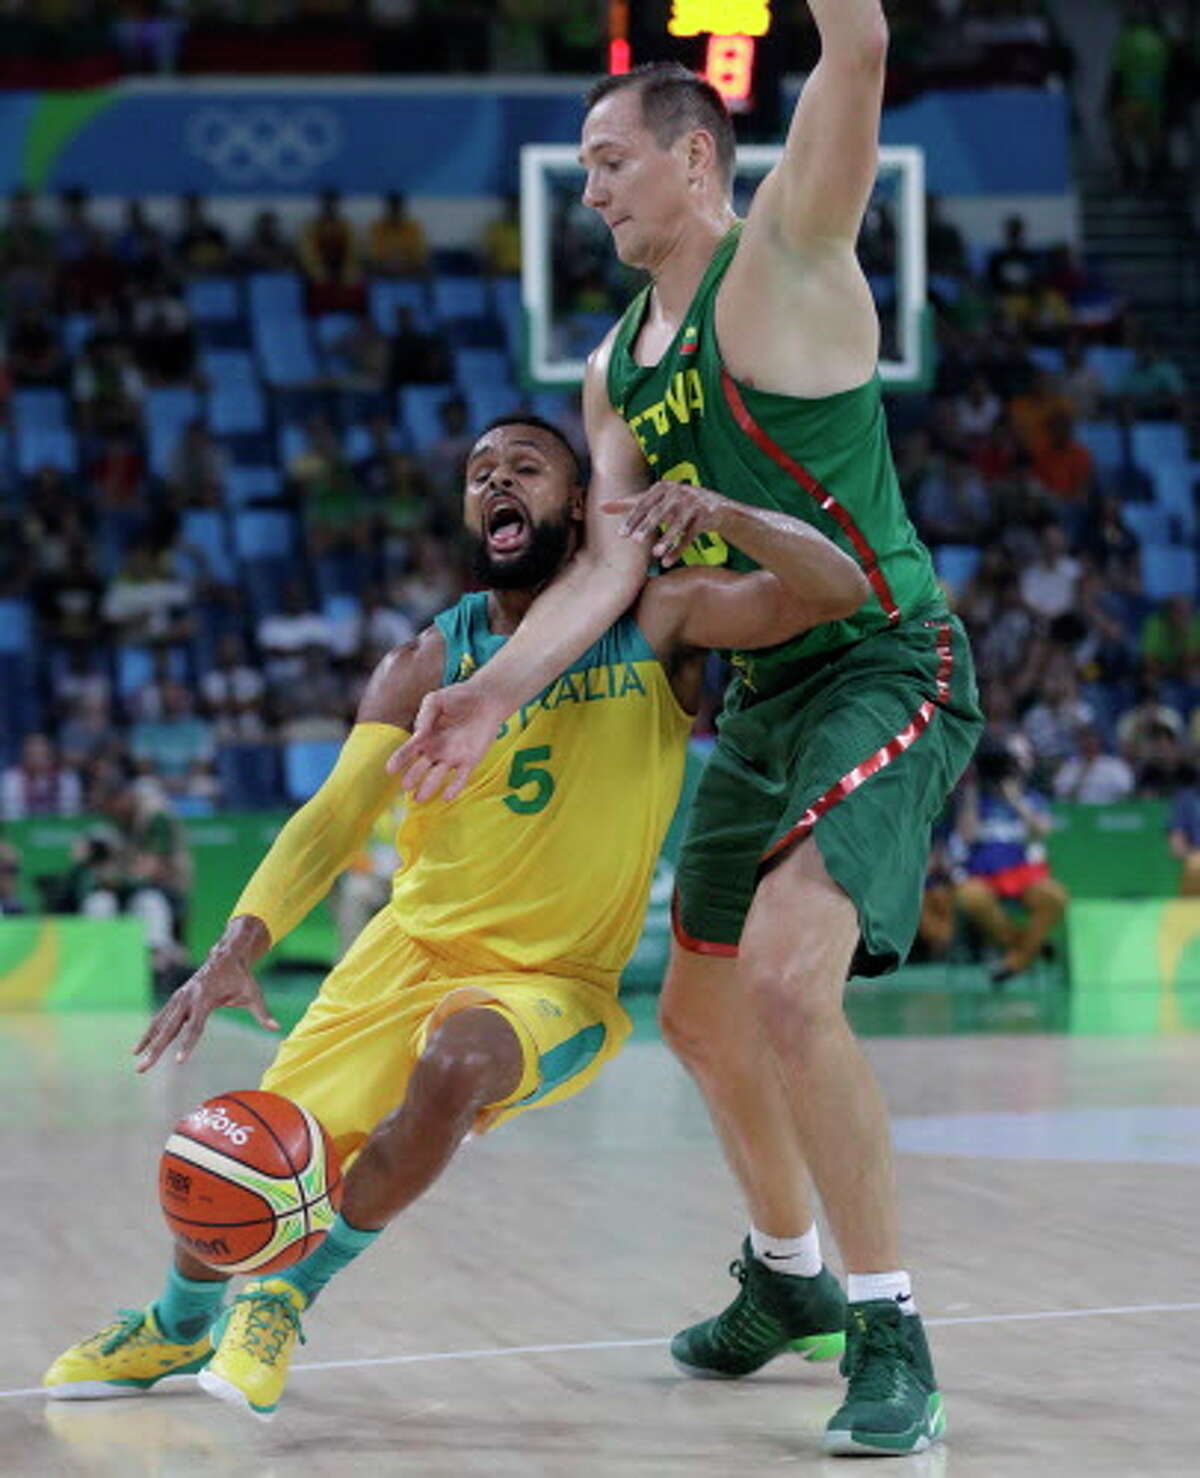 Australia's Patty Mills (5) is fouled by Lithuania's Paulius Jankunas (13) during a men's quarterfinal round basketball game against Australia at the 2016 Summer Olympics in Rio de Janeiro, Brazil, Wednesday, Aug. 17, 2016. (AP Photo/Eric Gay)